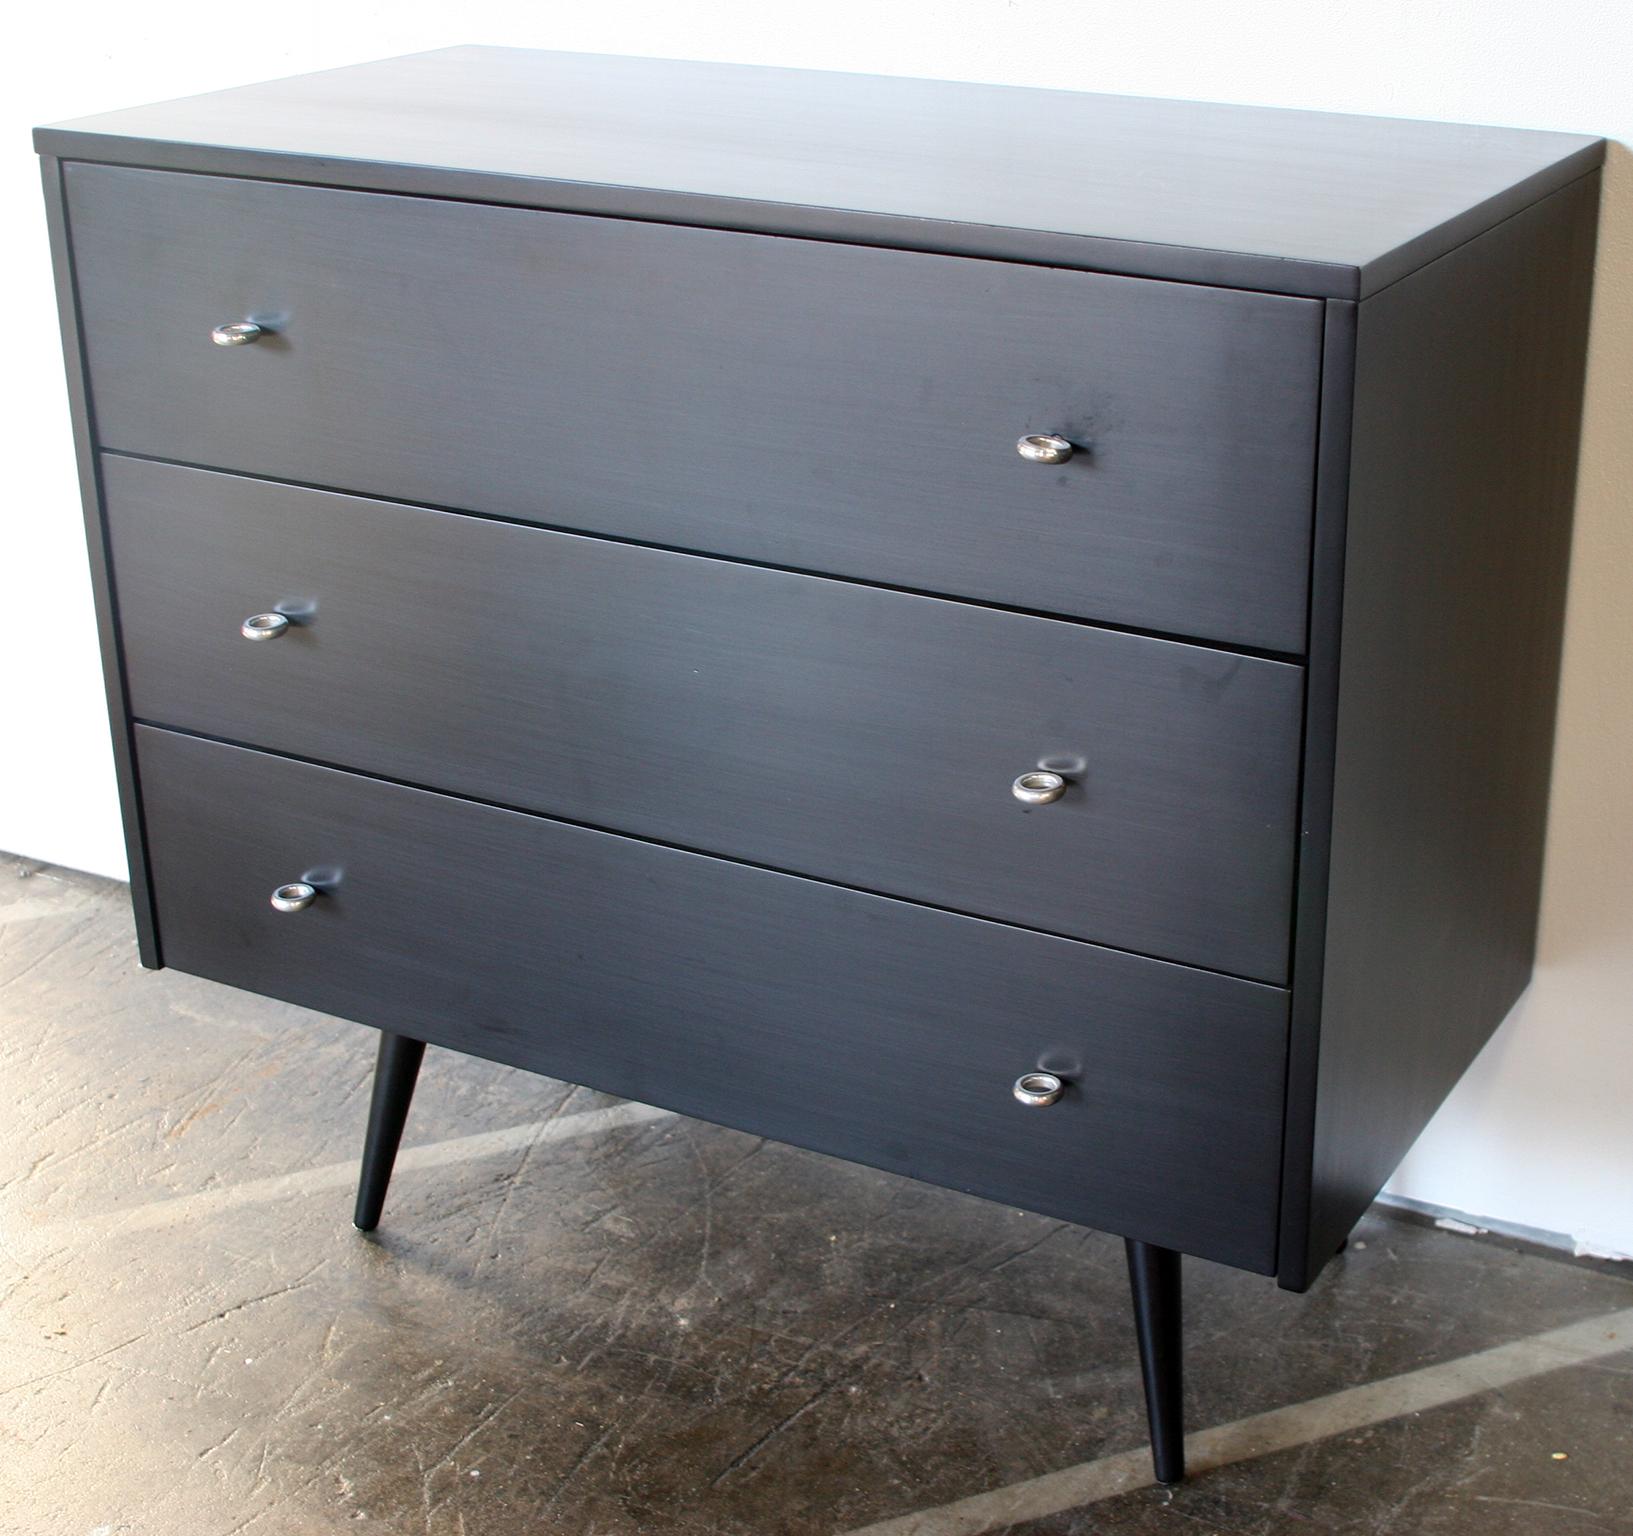 Beautiful midcentury low dresser triple drawer dresser by Paul McCobb, circa 1950 planner group #1508 with 3-center drawers. Solid maple construction has a Beautiful black lacquered finish. All original aluminium ring pulls sits on 4 solid maple